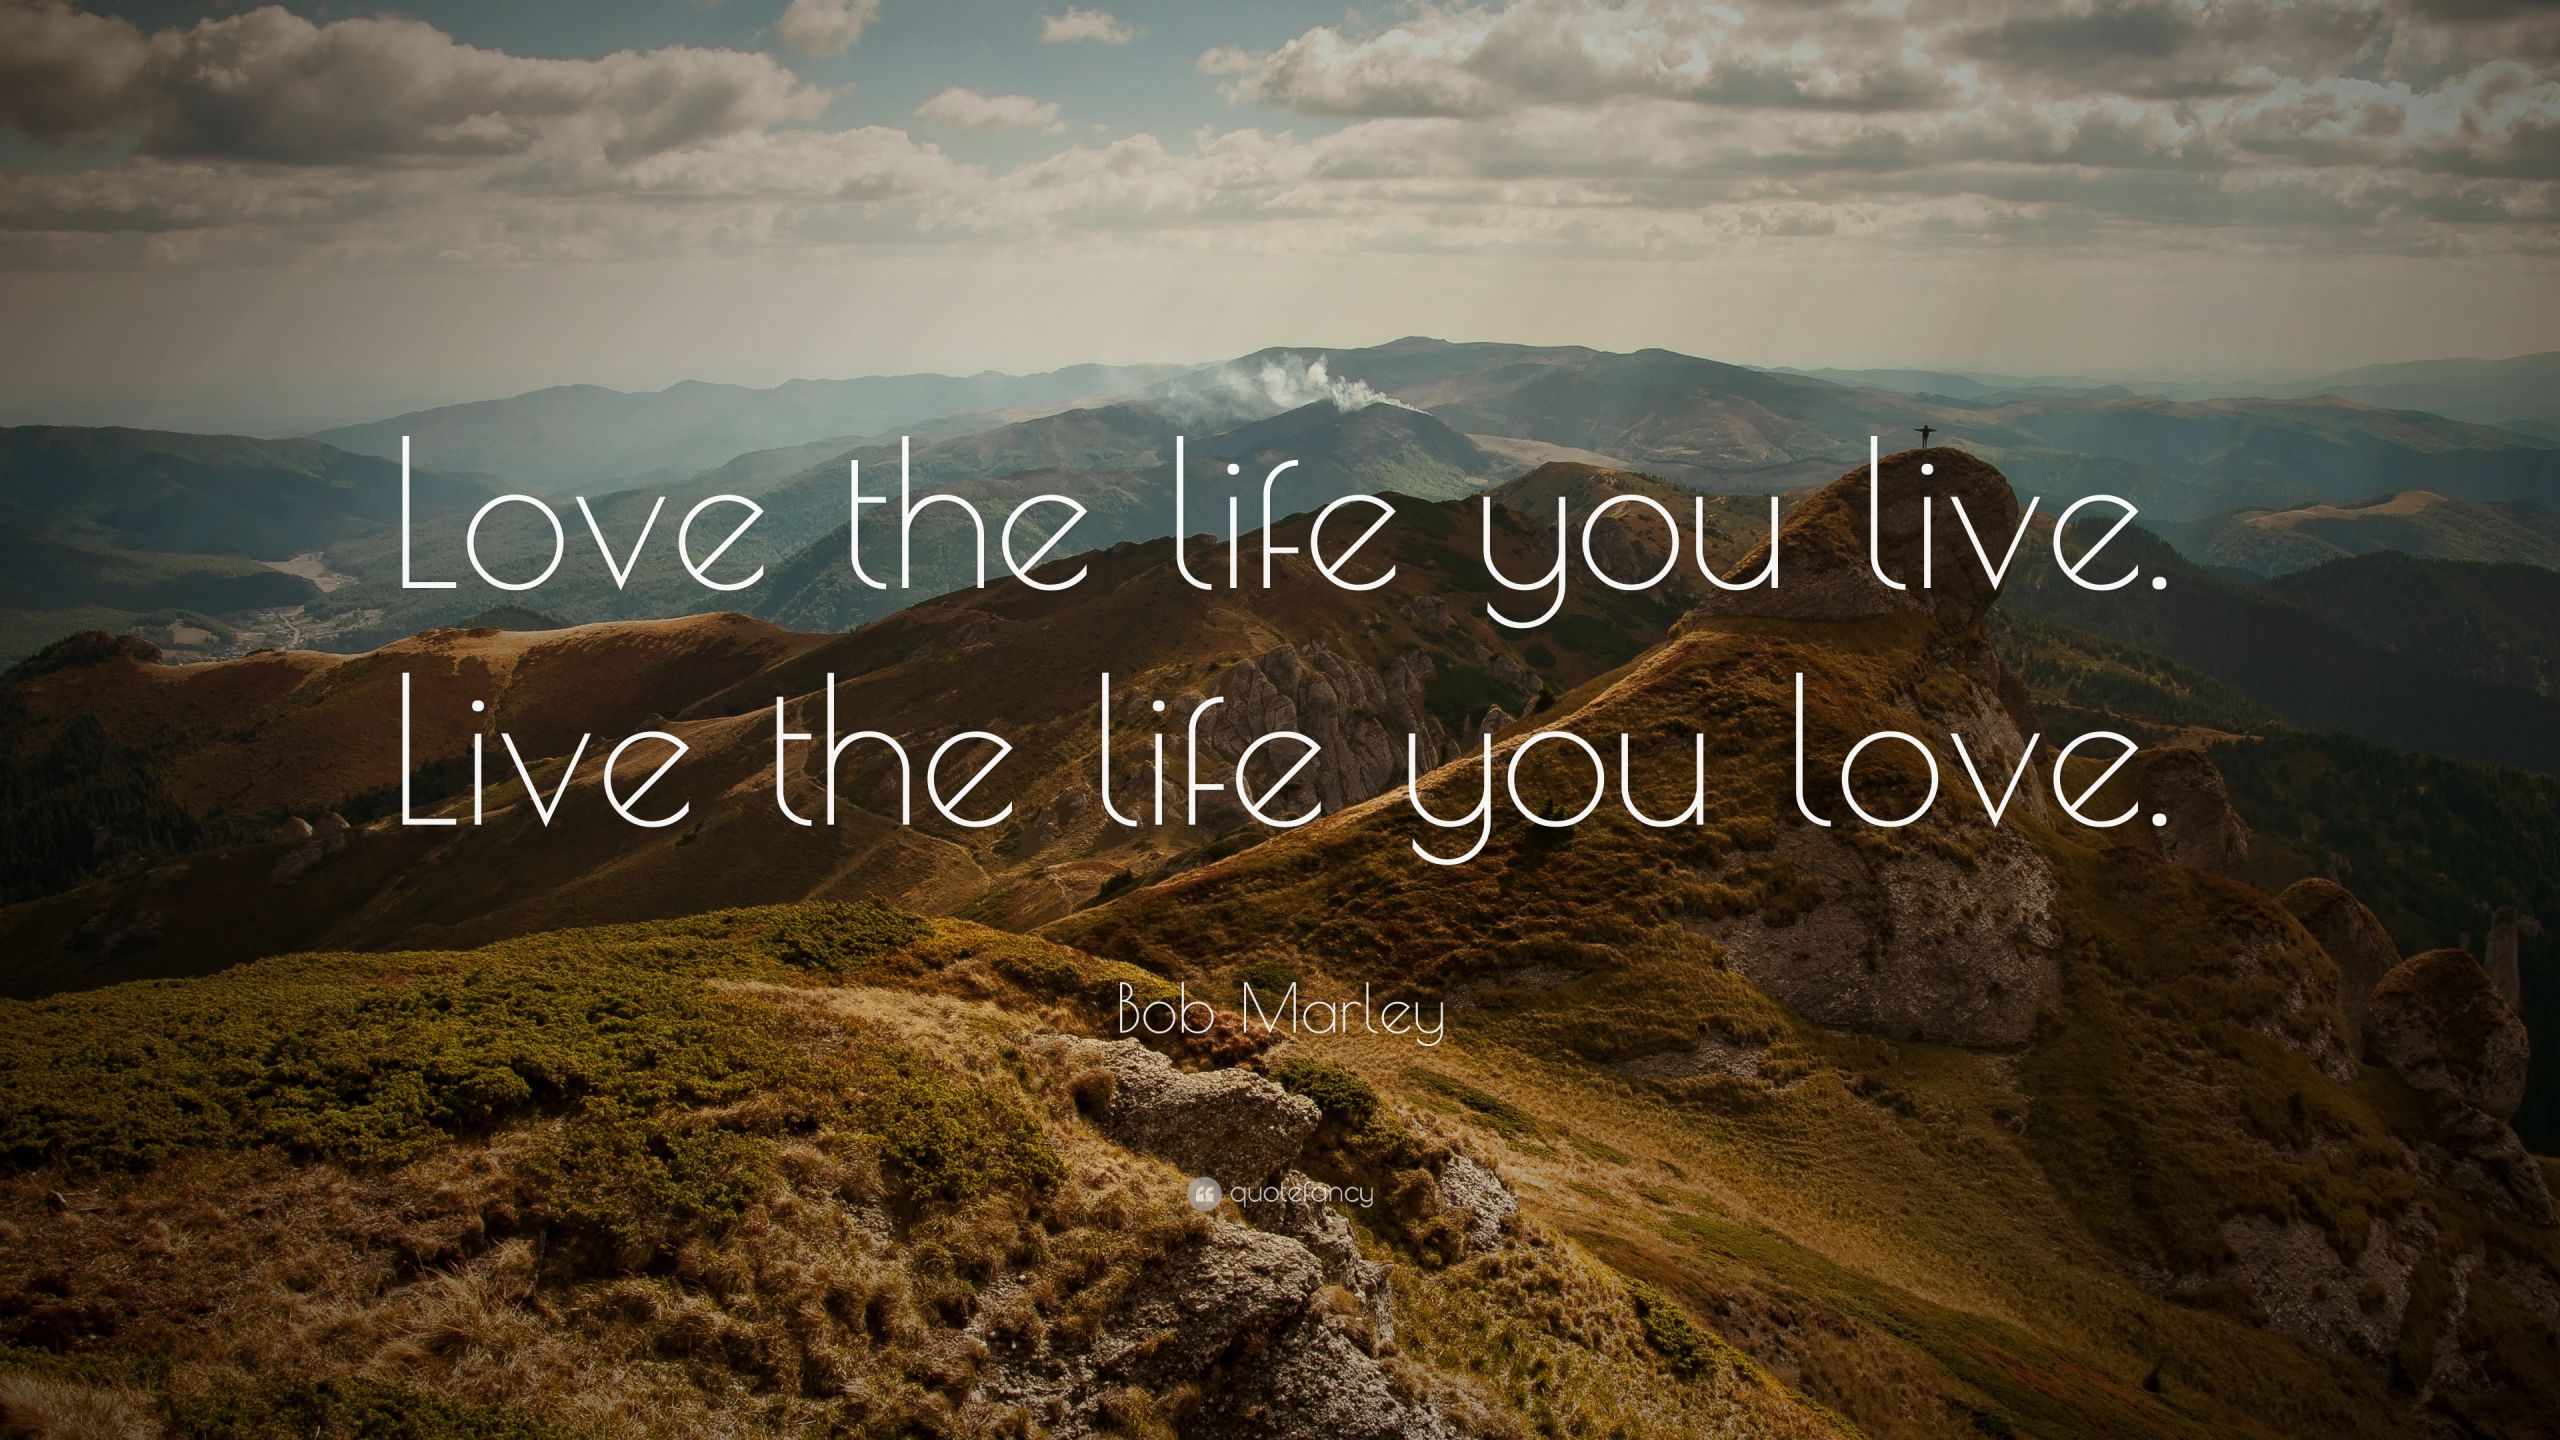 Live Love Life Quotes
 100 Inspirational Quotes That Will Make You Love Life Again